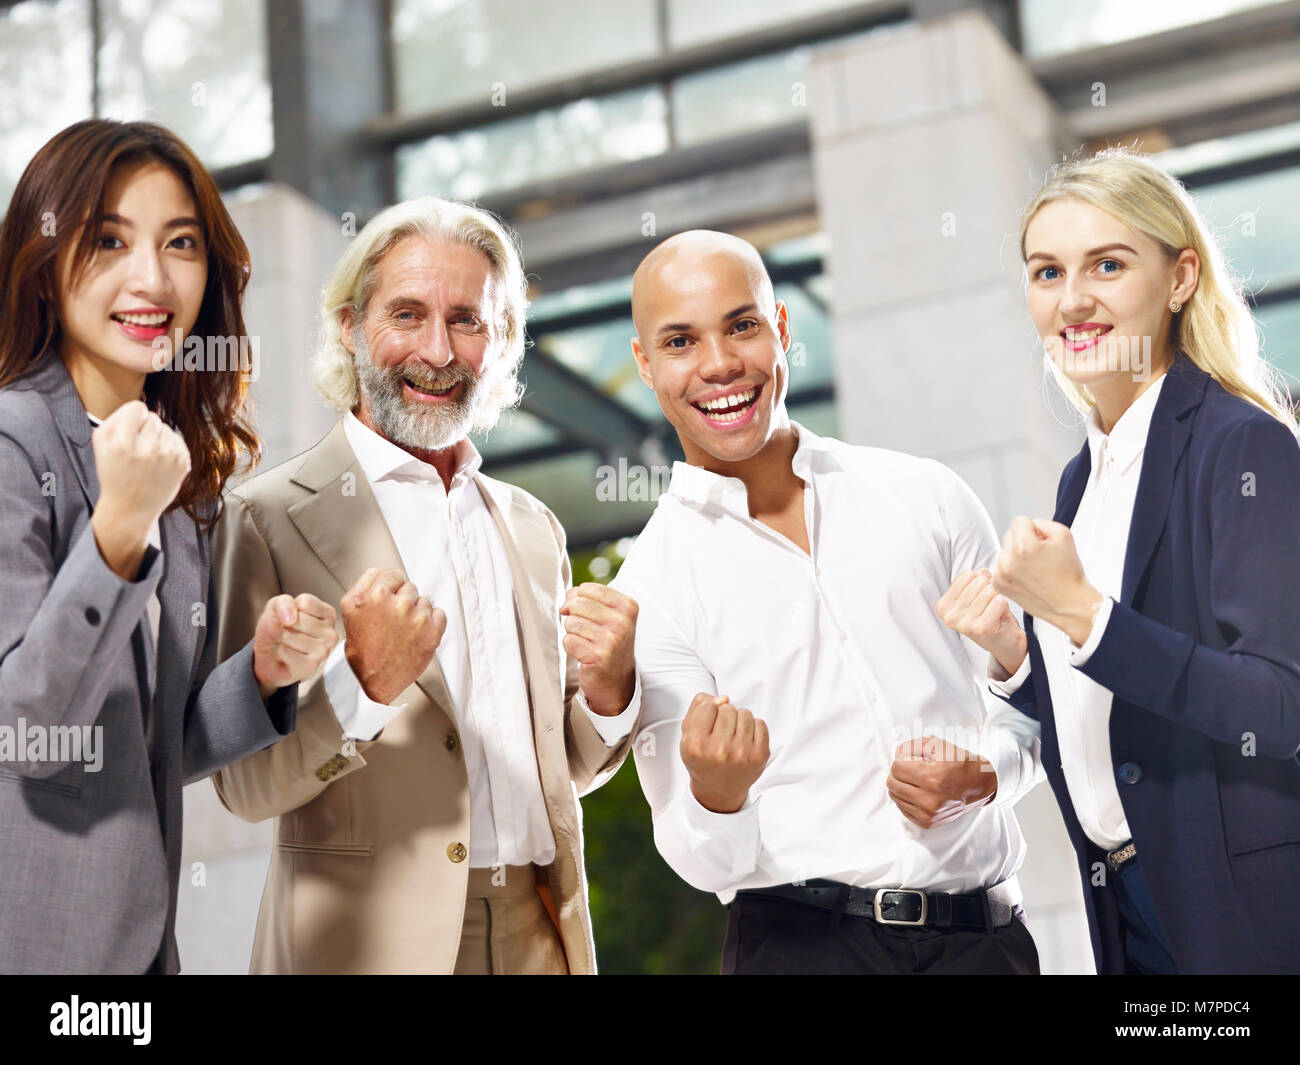 caucasian asian latino corporate business people making a fist showing determination and team spirit Stock Photo